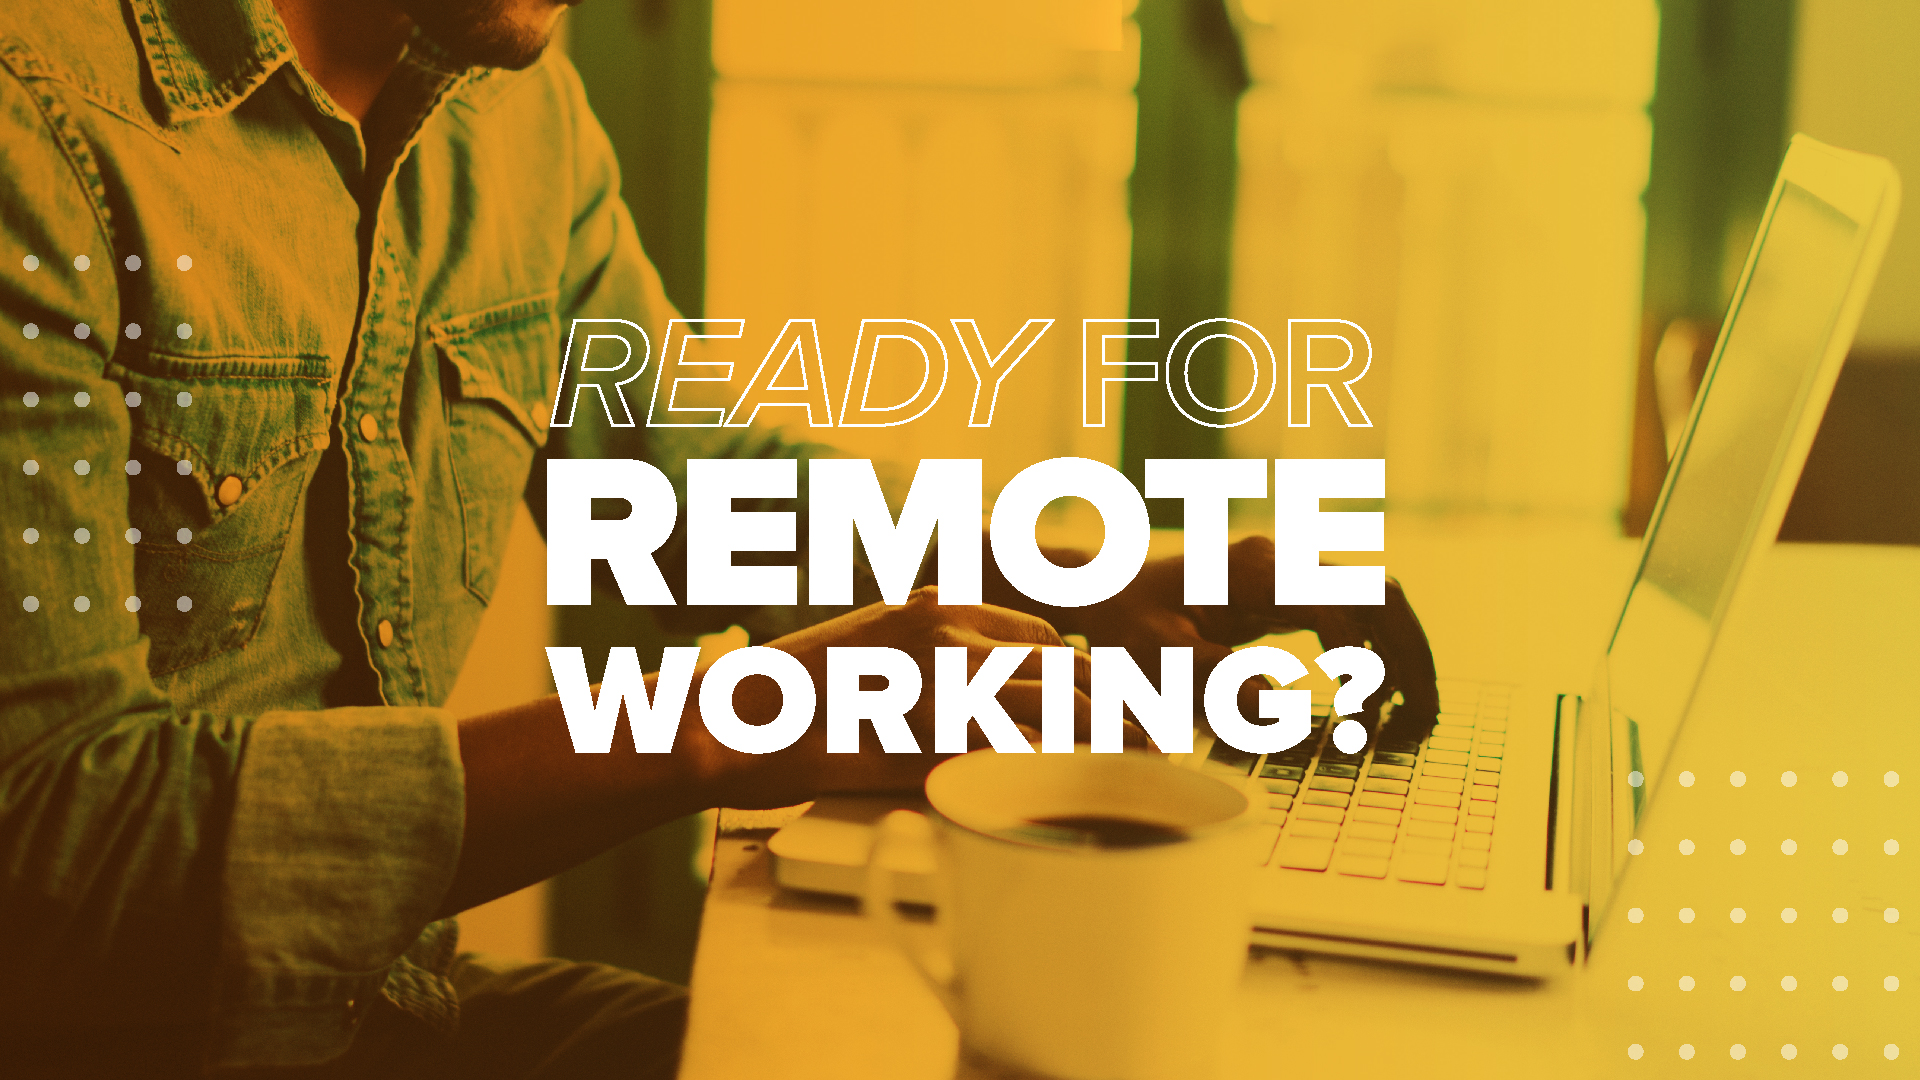 Ready For Remote Working?